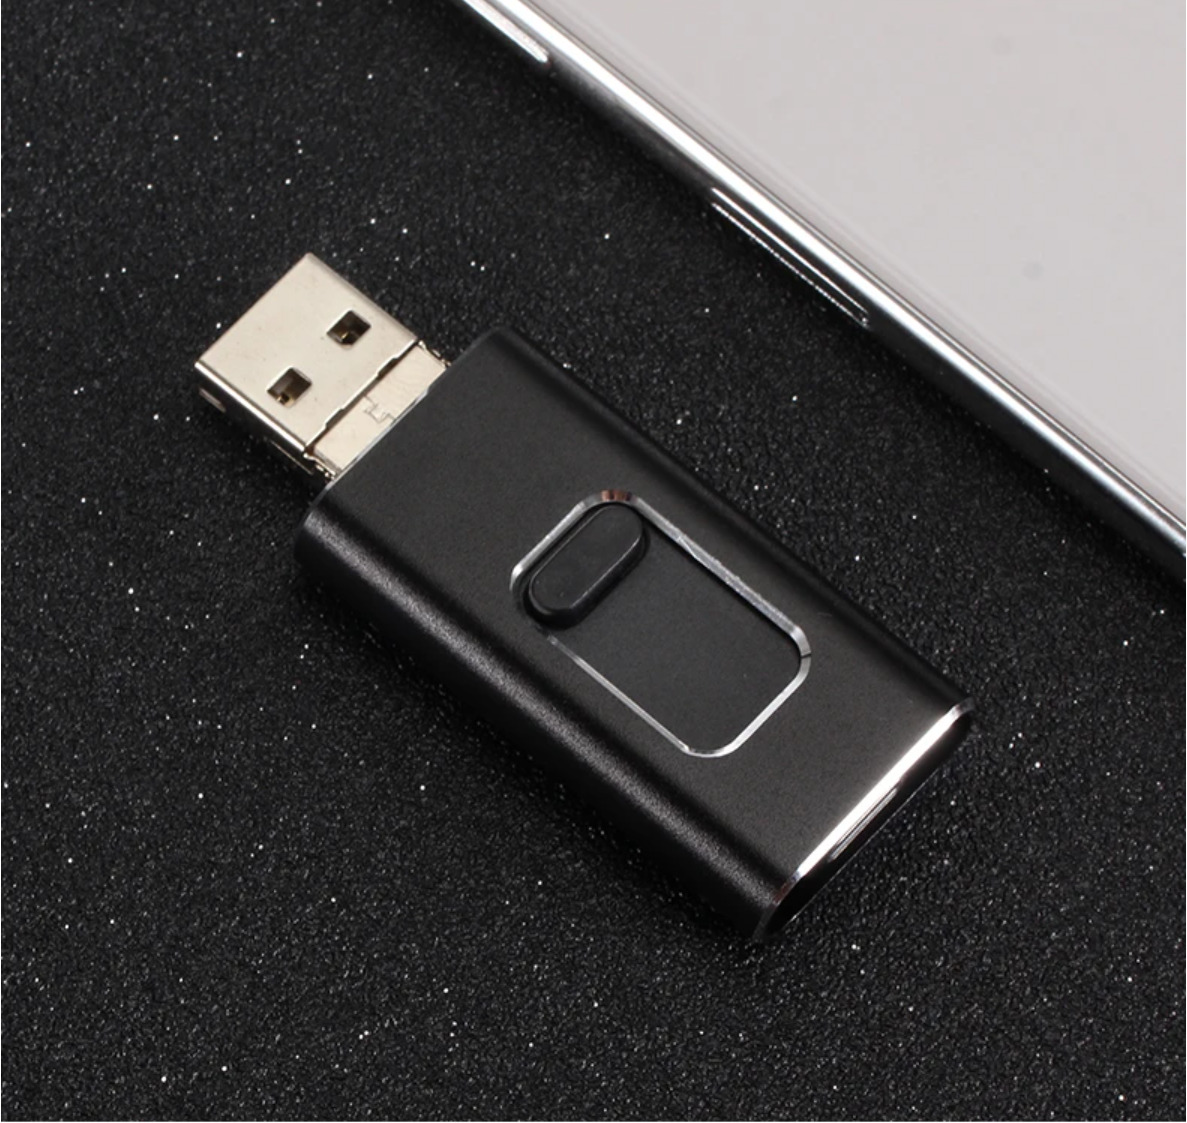 4 in 1 OTG USB Flash Drive Memory Stick for iPhone Android iPad Type C Pen Drive